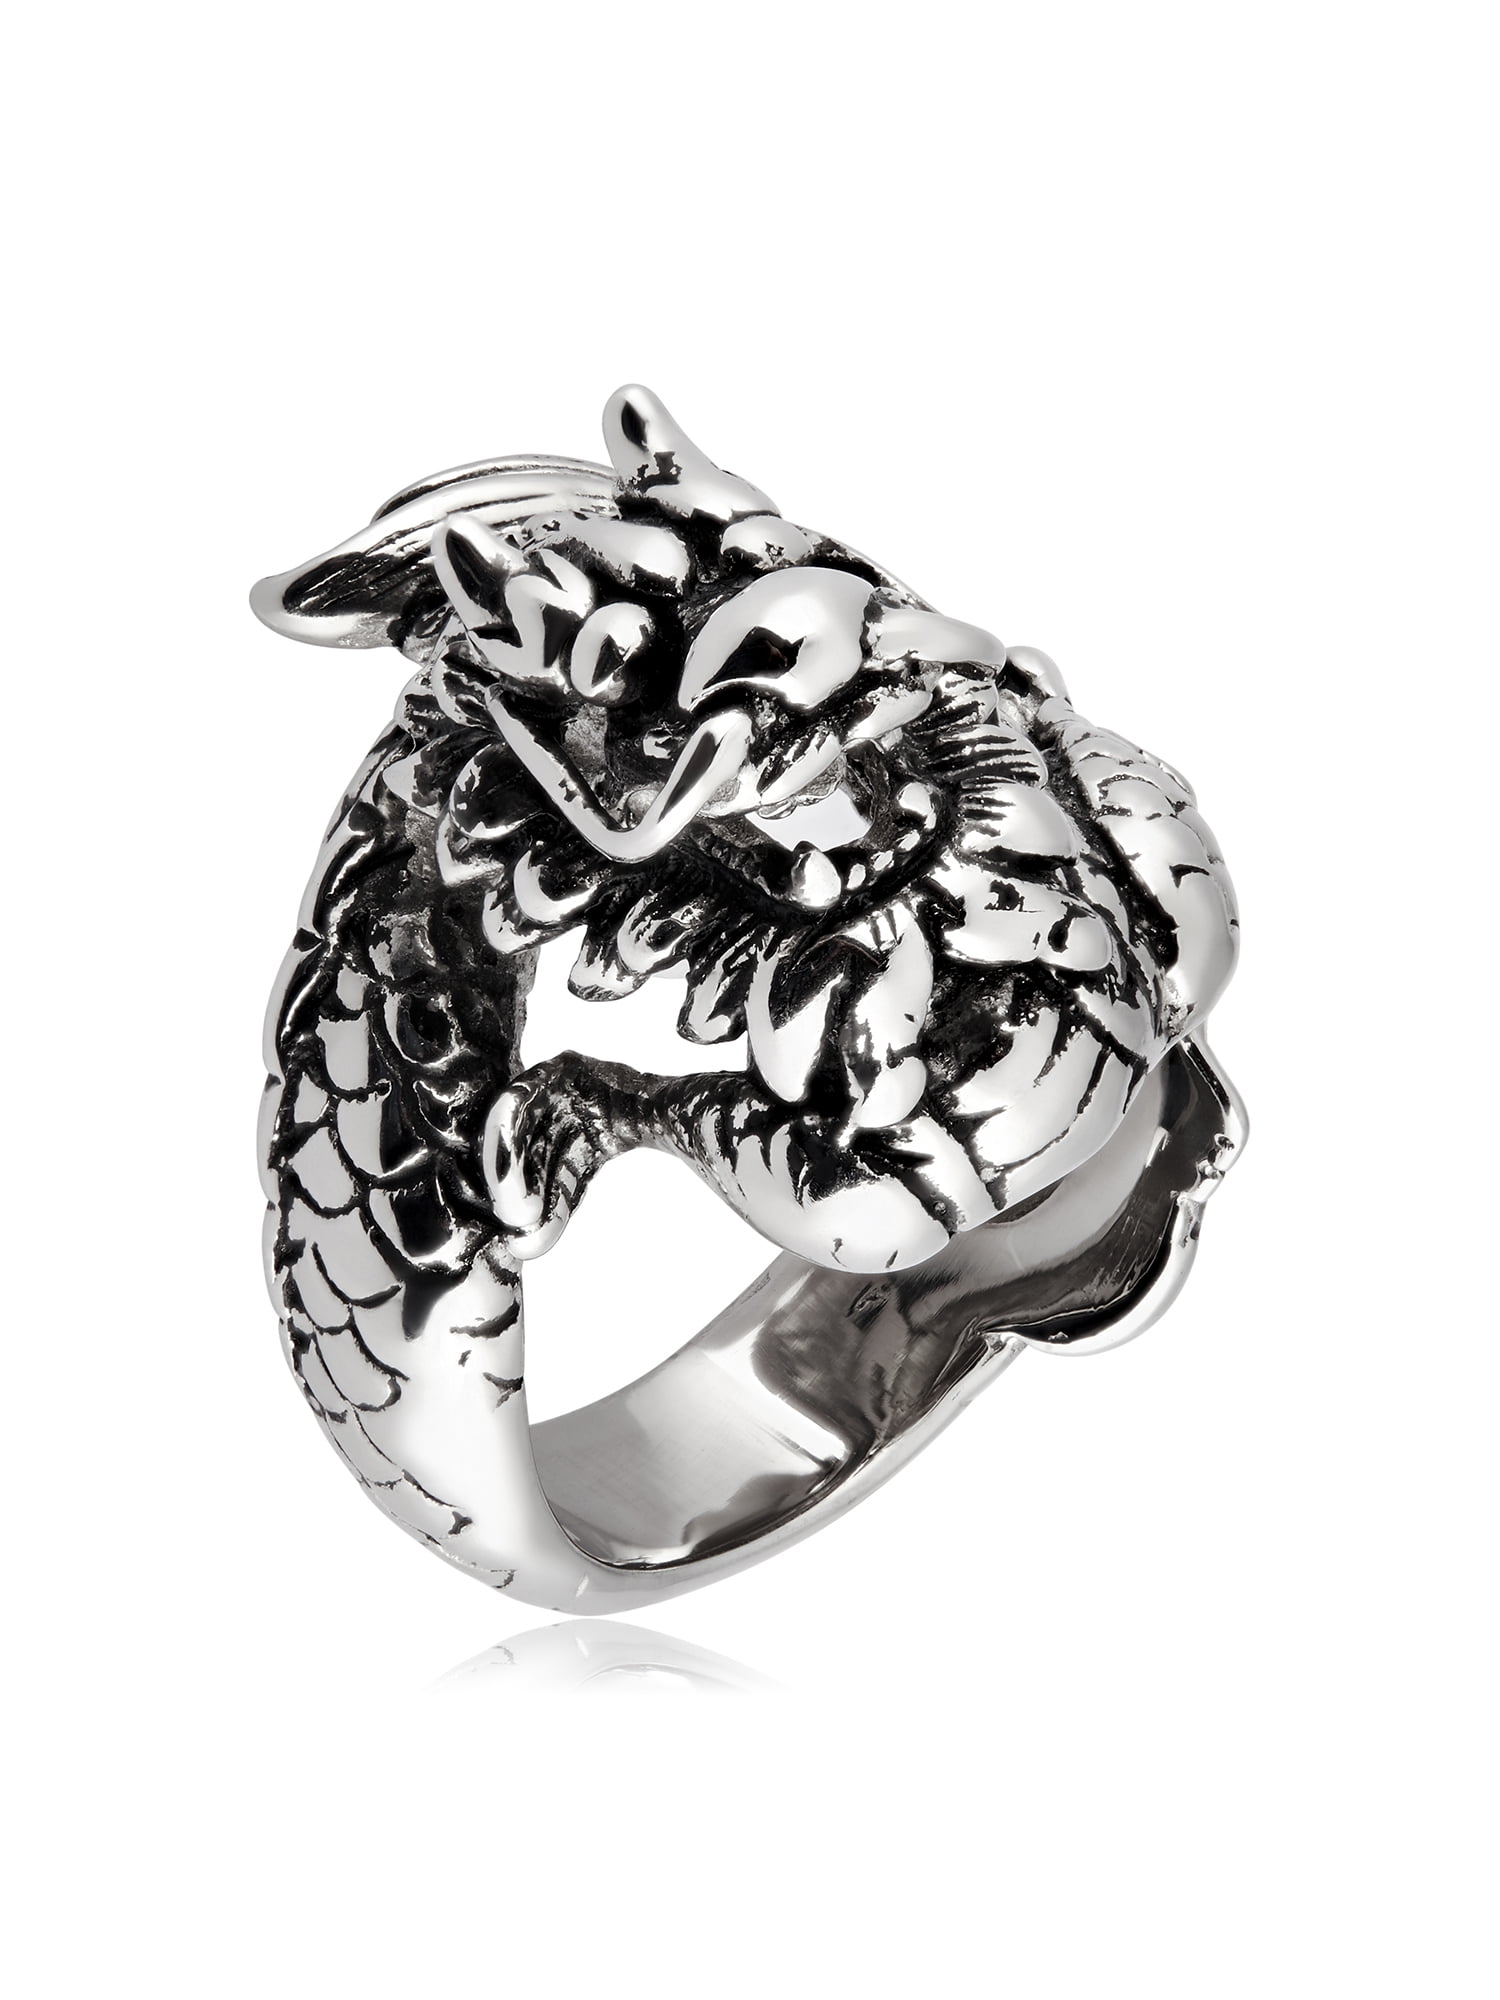 Raising Dragon Ring with Red Stone Eye Vintage Stainless Steel Men's Jewelry 